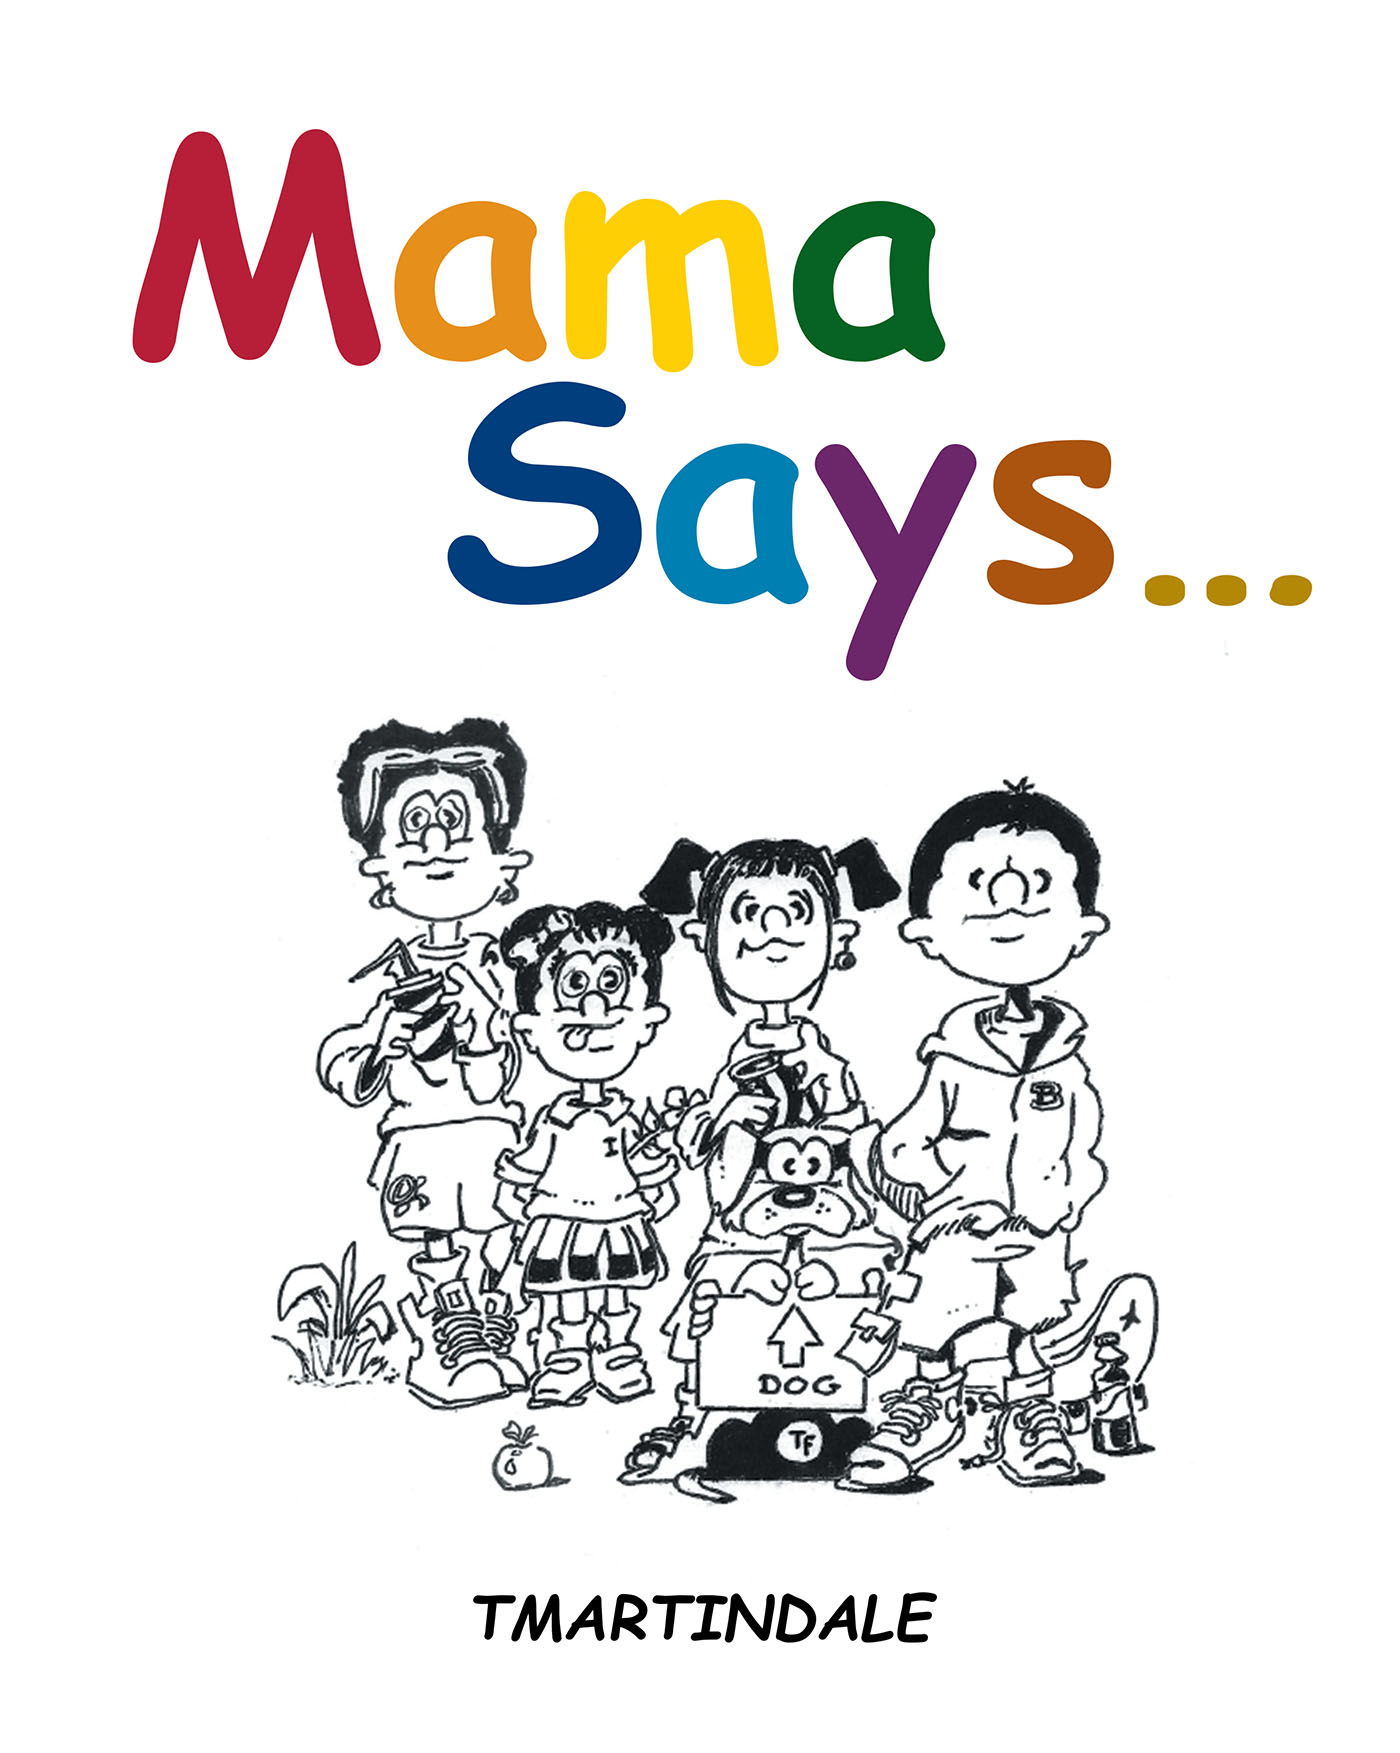 Author TMartindale’s New Book, "Mama Says..." is a Compilation of Comics Centered Around Five Children and Their Pets as They Experience Various Adventures and Mishaps